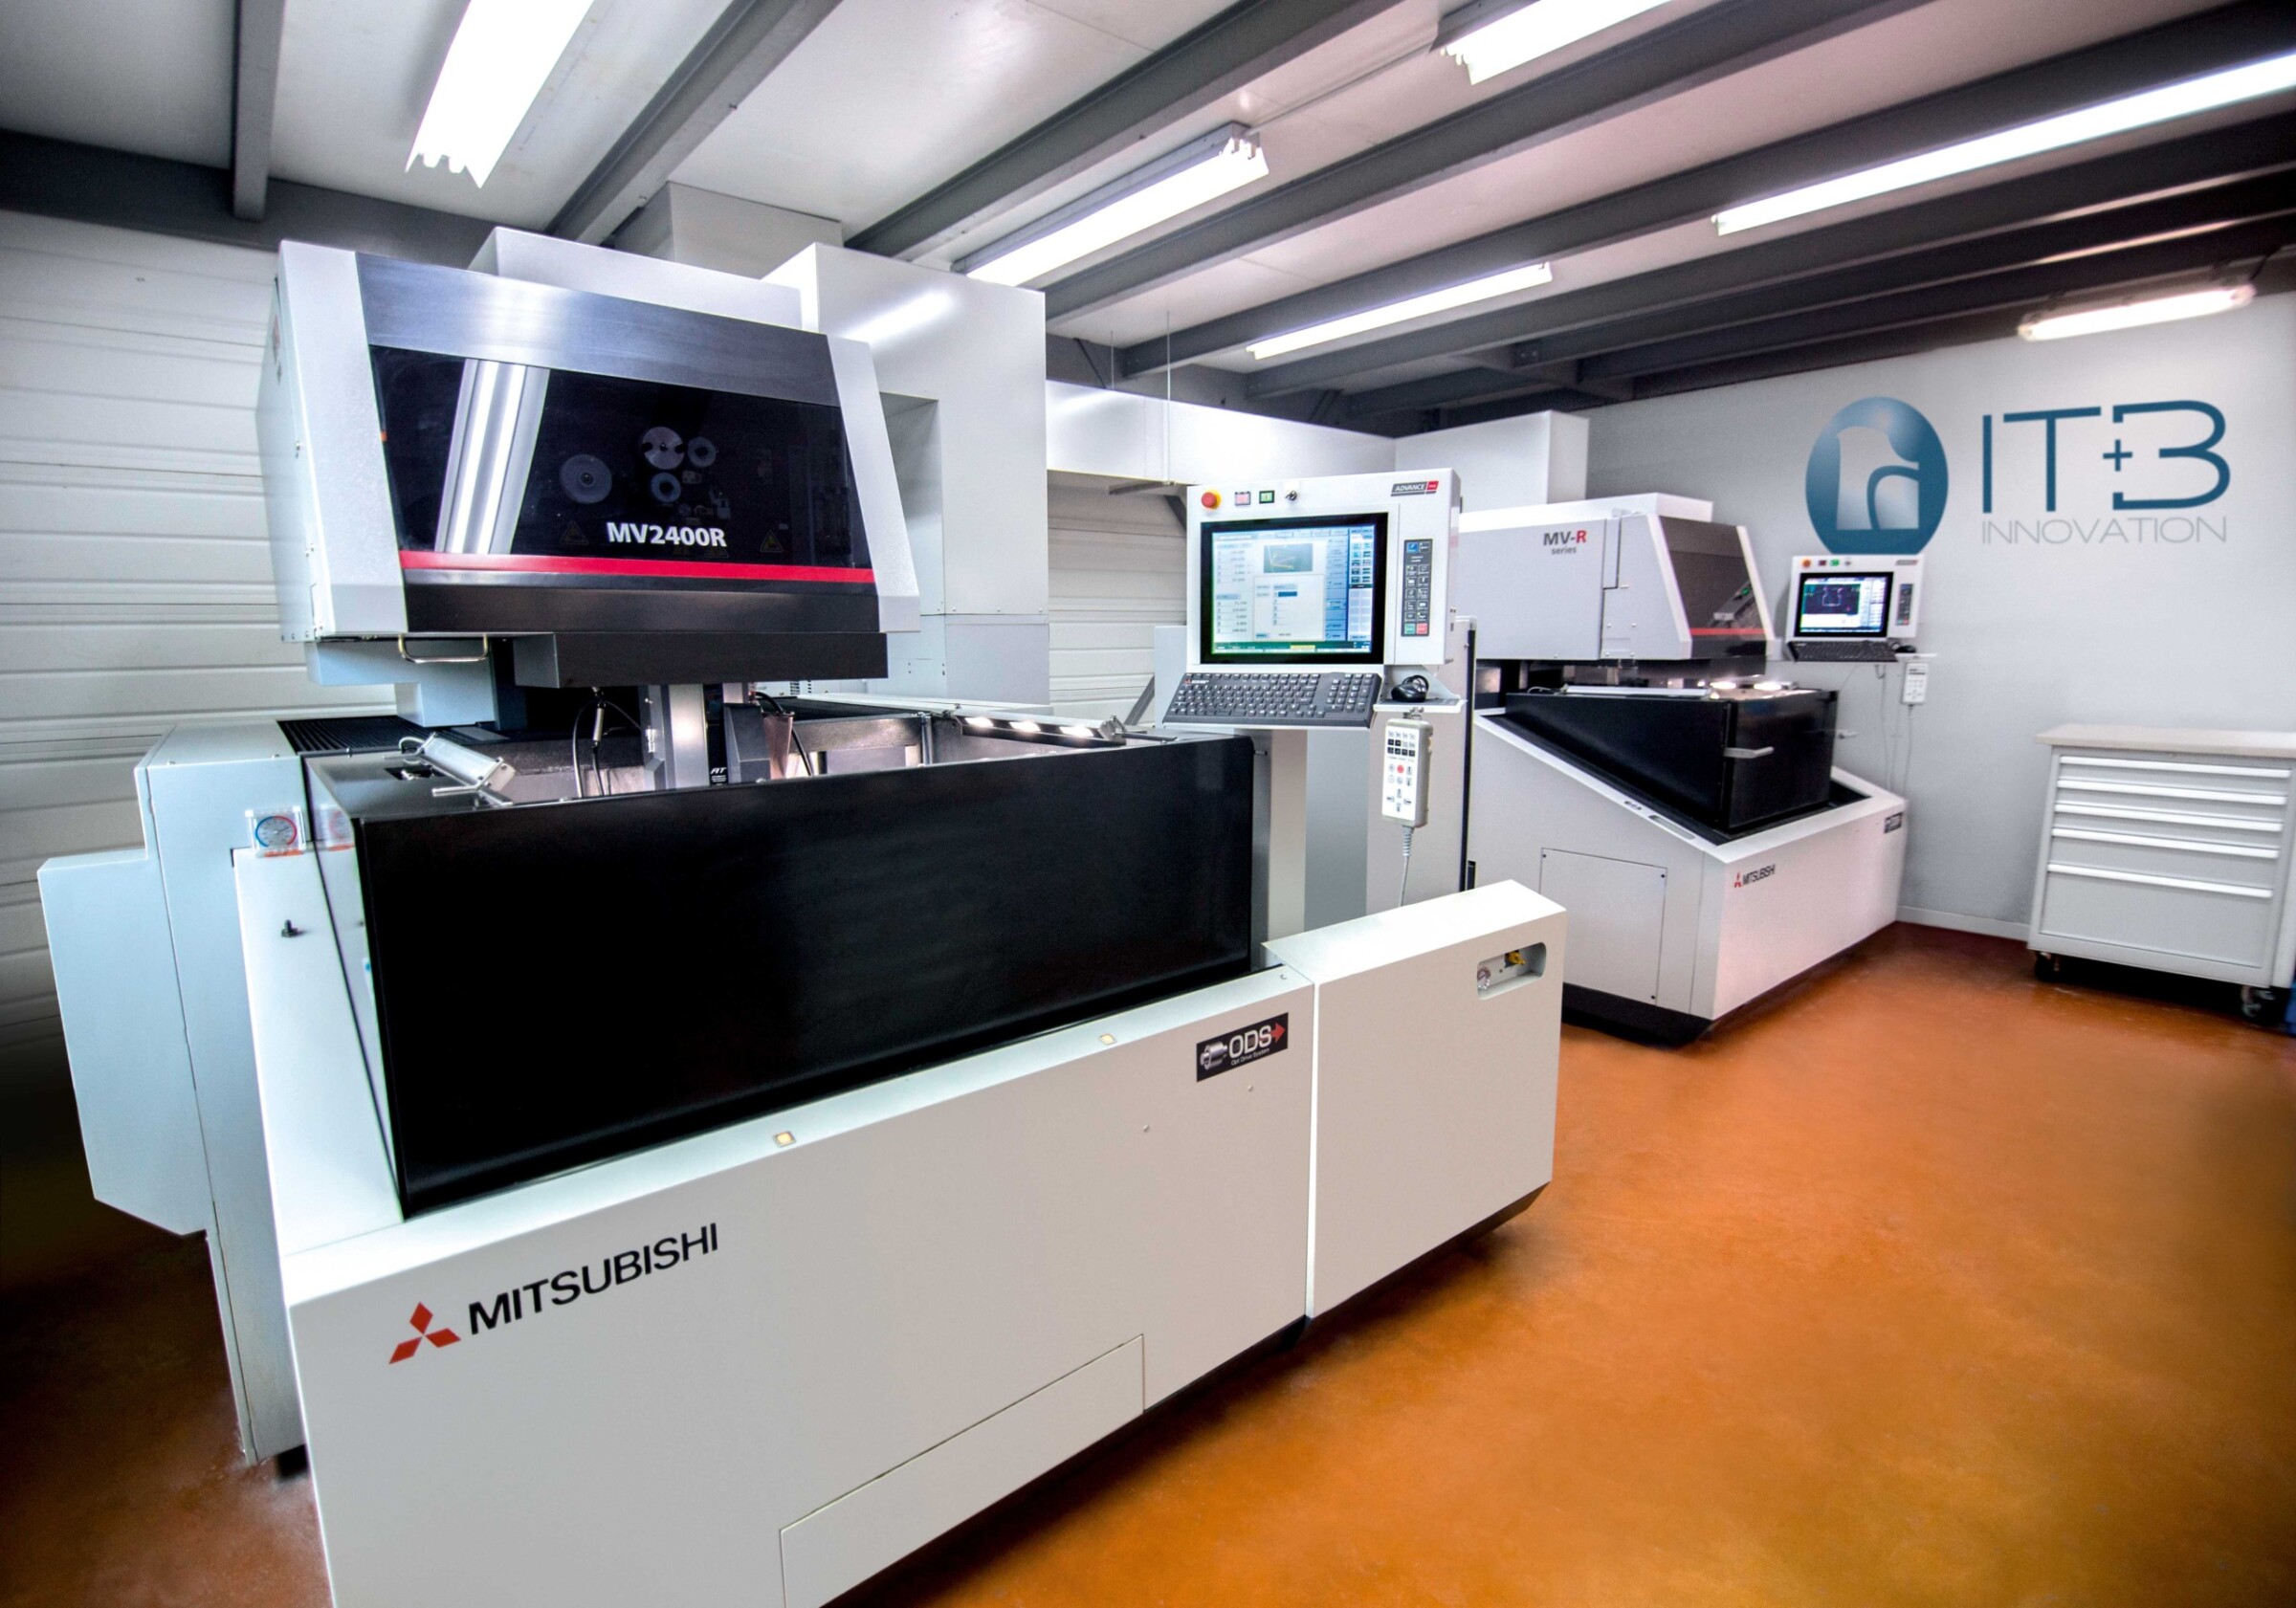 To ensure high precision, ITB Innovation operates its MV1200R and MV2400R wire-cutting machines in an air-conditioned room with a controlled temperature.